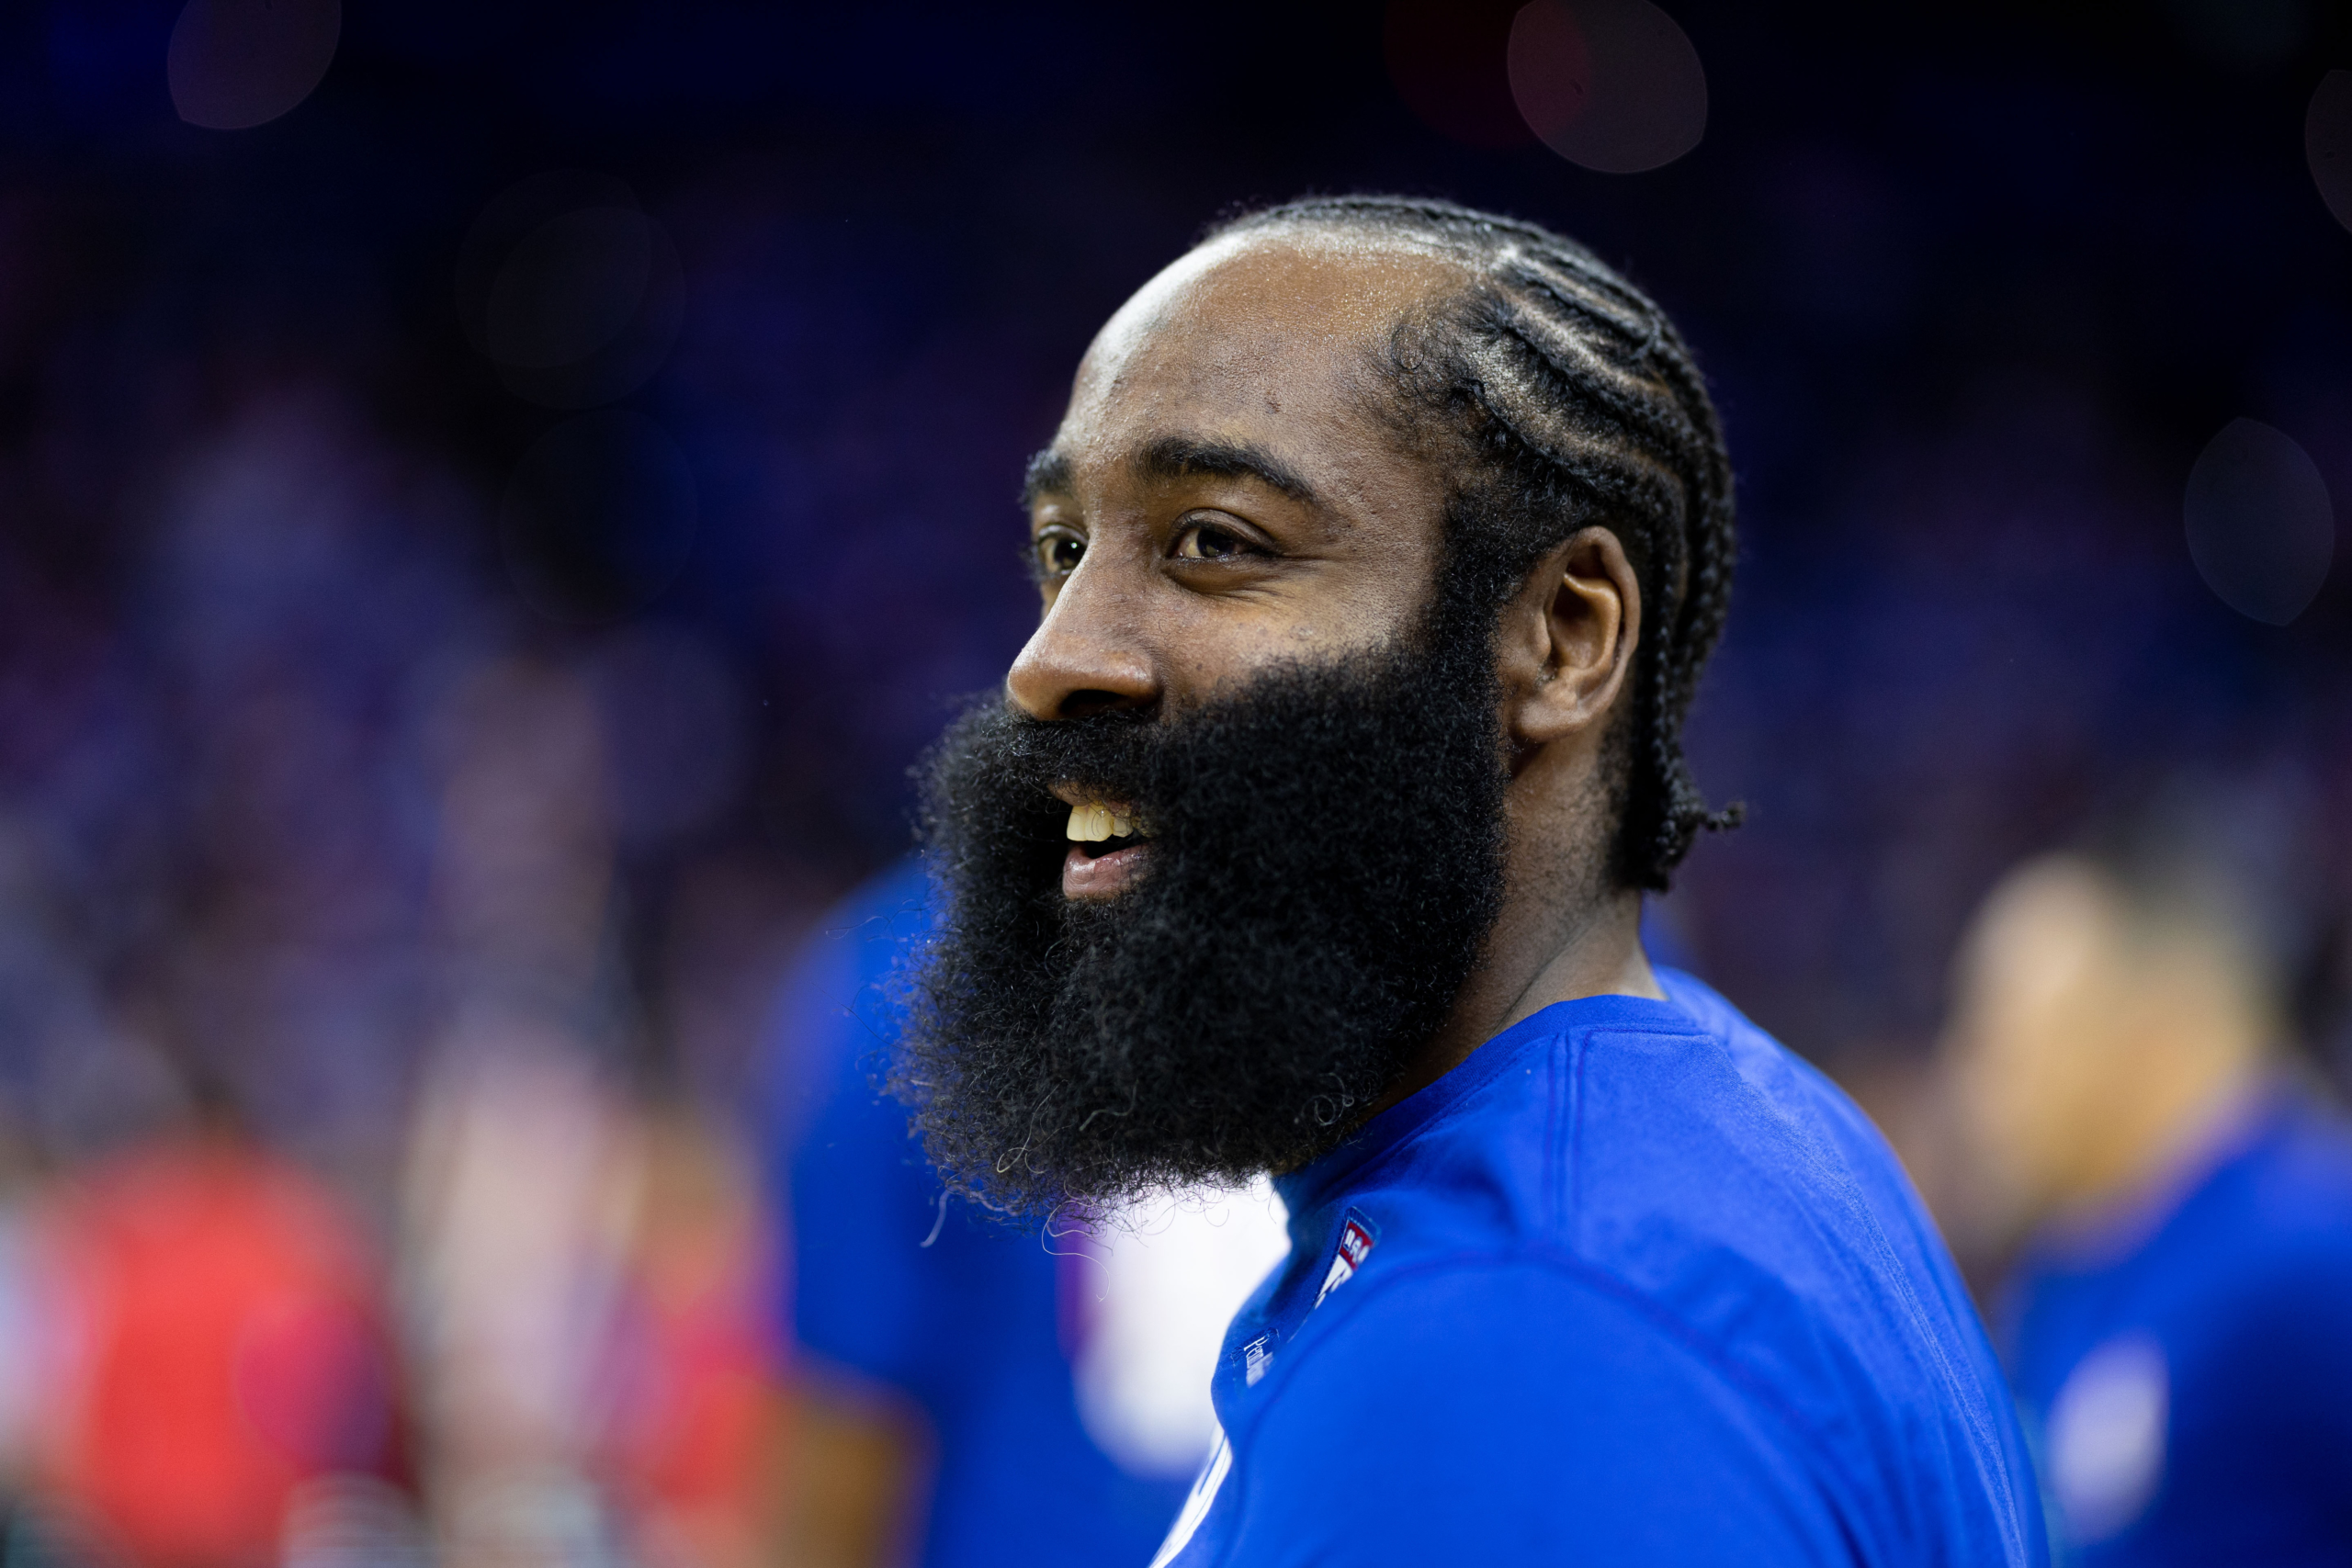 Brooklyn Nets: James Harden's return paramount for playoff preparation